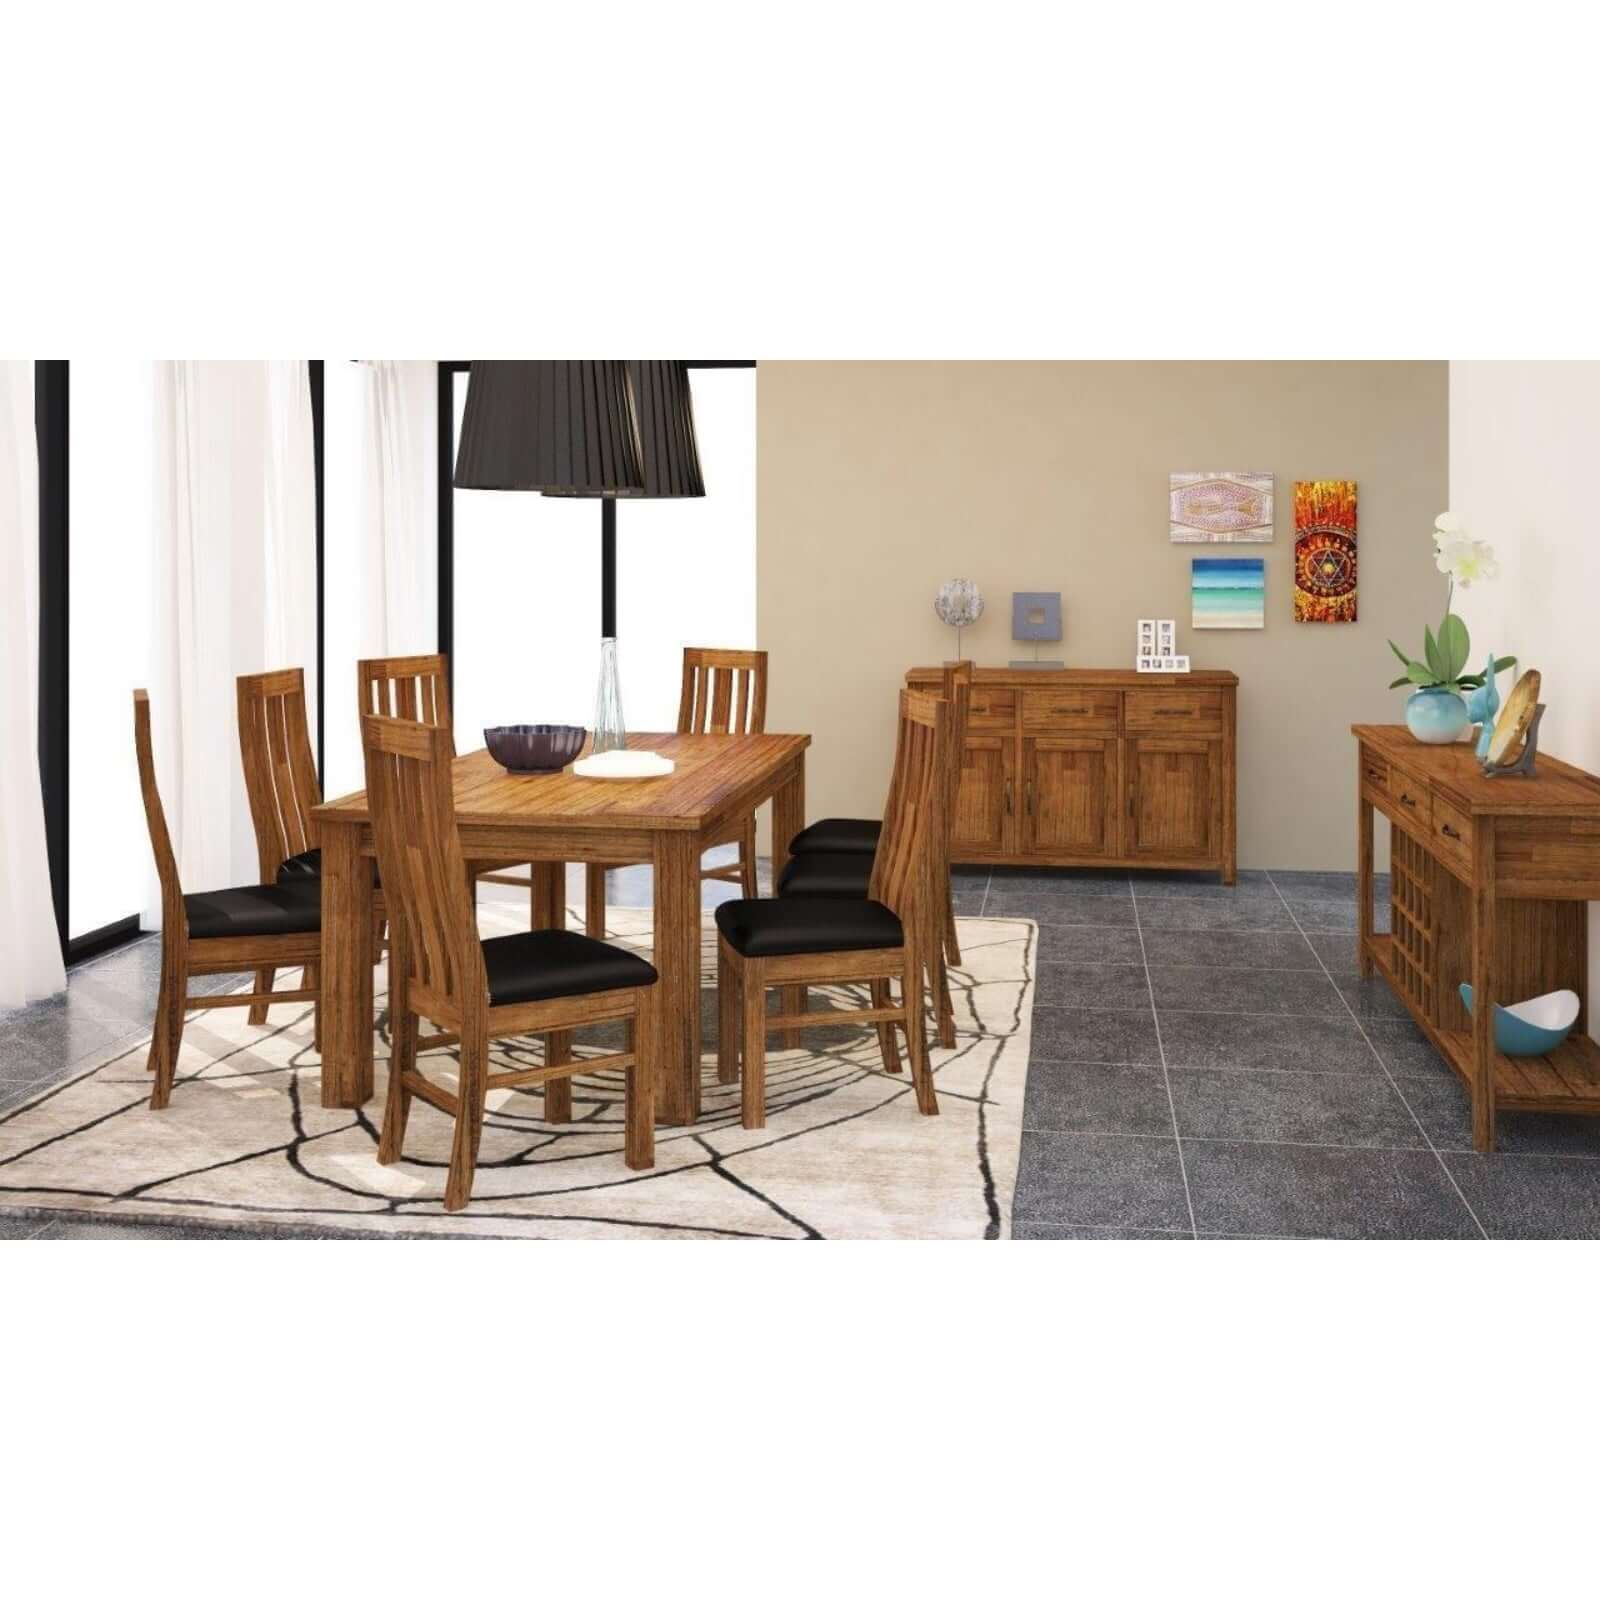 Birdsville 9pc Dining Set 225cm Table 8 PU Seat Chair Solid Mt Ash Wood - Brown-Upinteriors